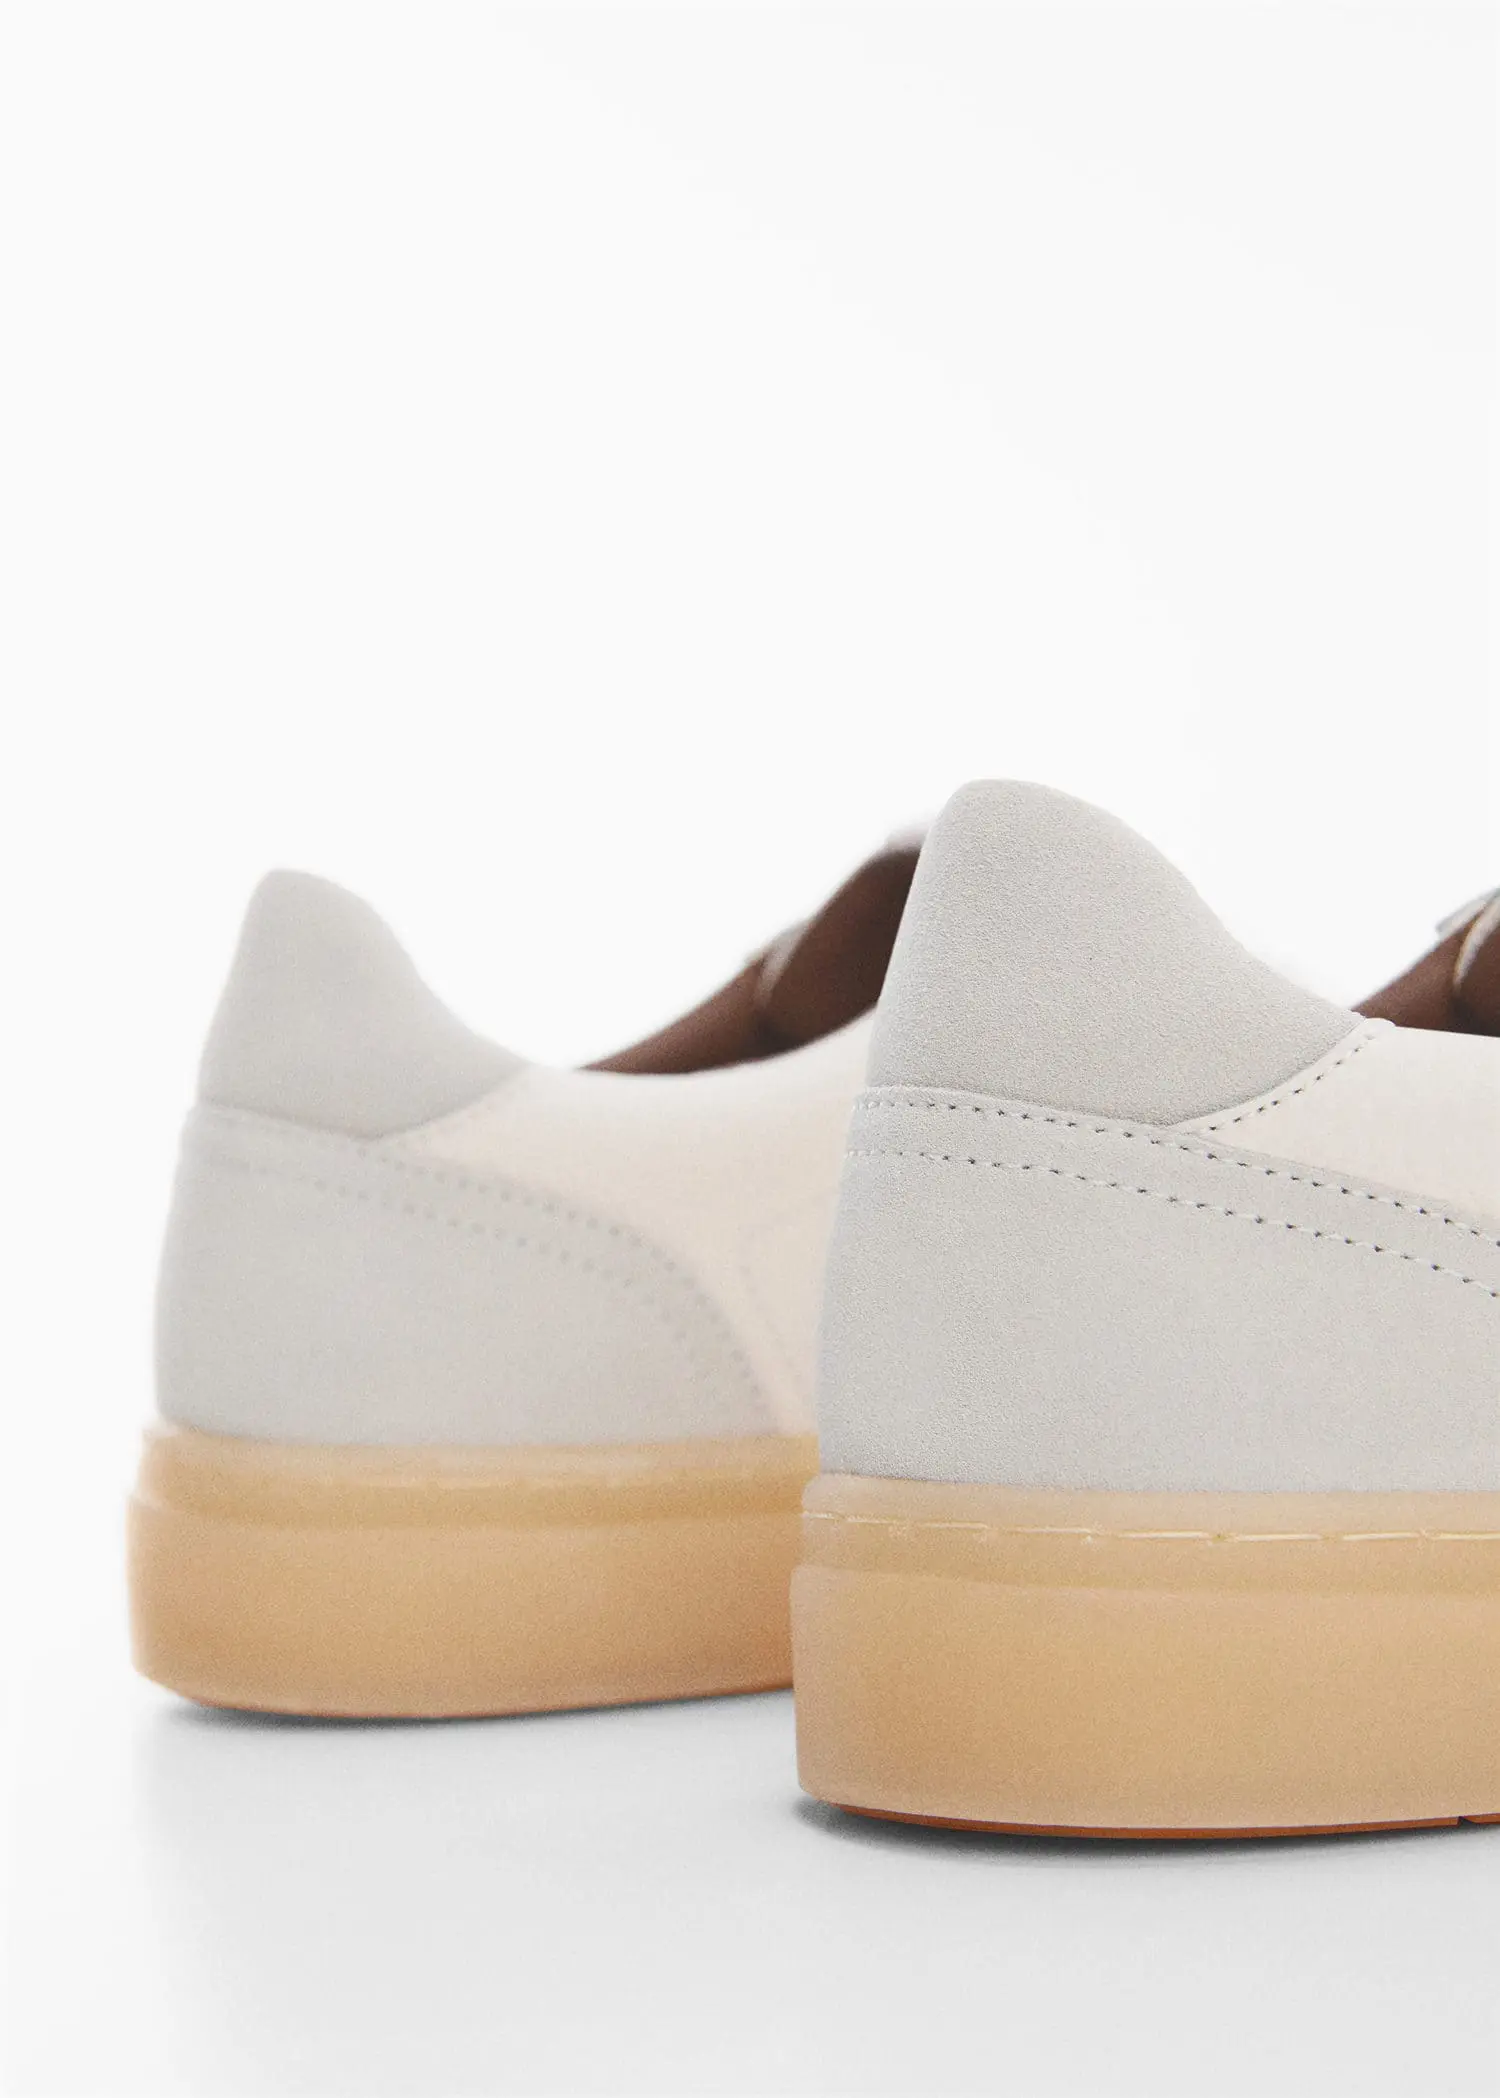 Mango Nappa leather sneakers. a close up view of a pair of white shoes. 